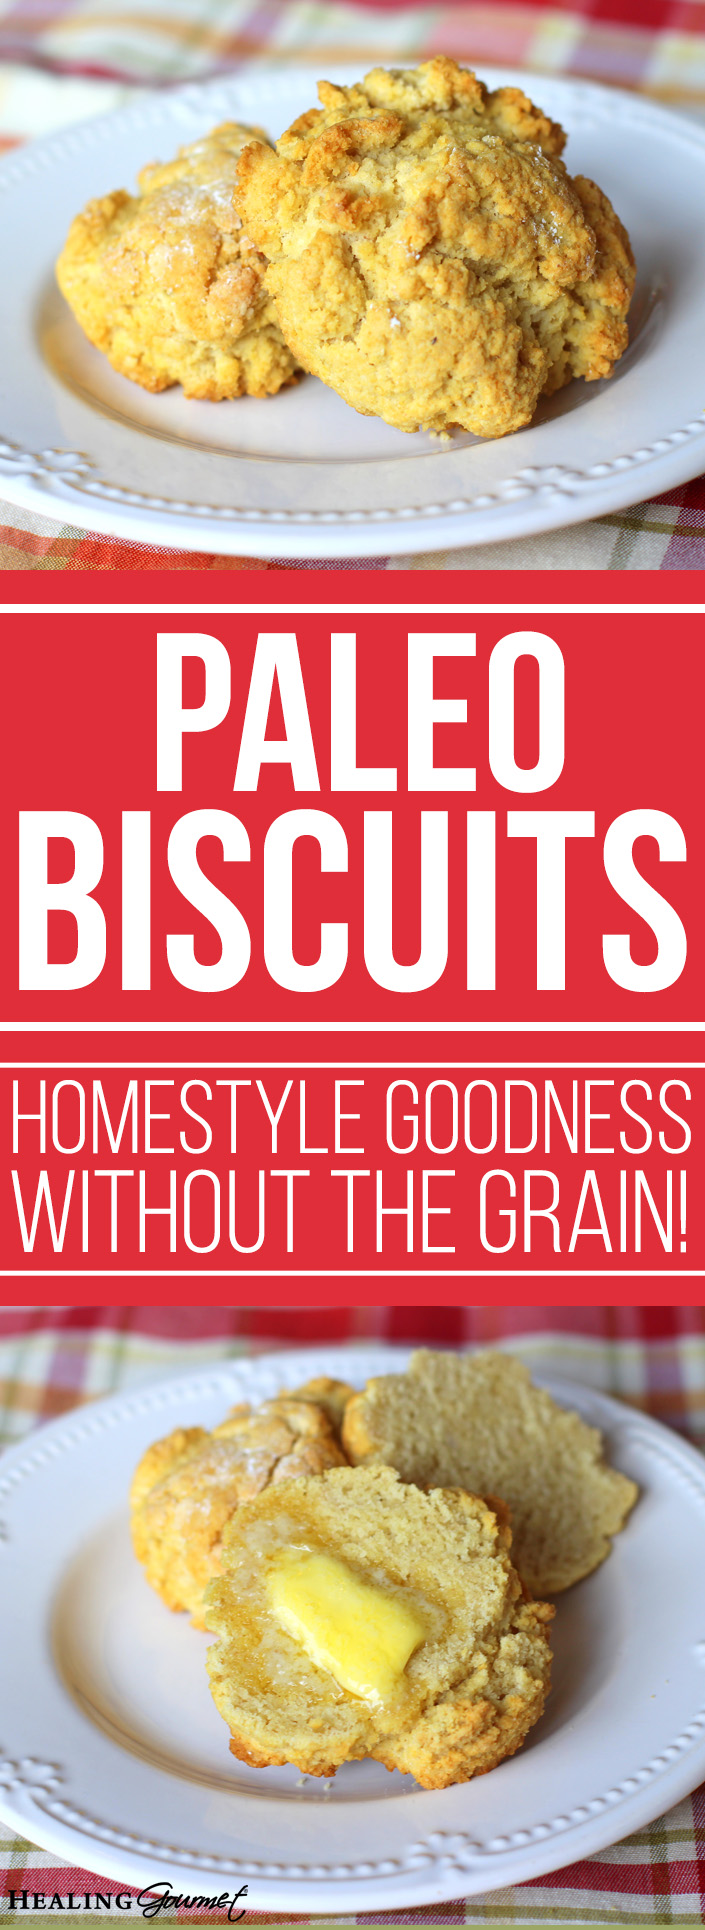 Looking for the perfect Paleo biscuits for a lazy weekend breakfast? This quick recipe rivals the traditional and can be on the table in just 30 minutes!